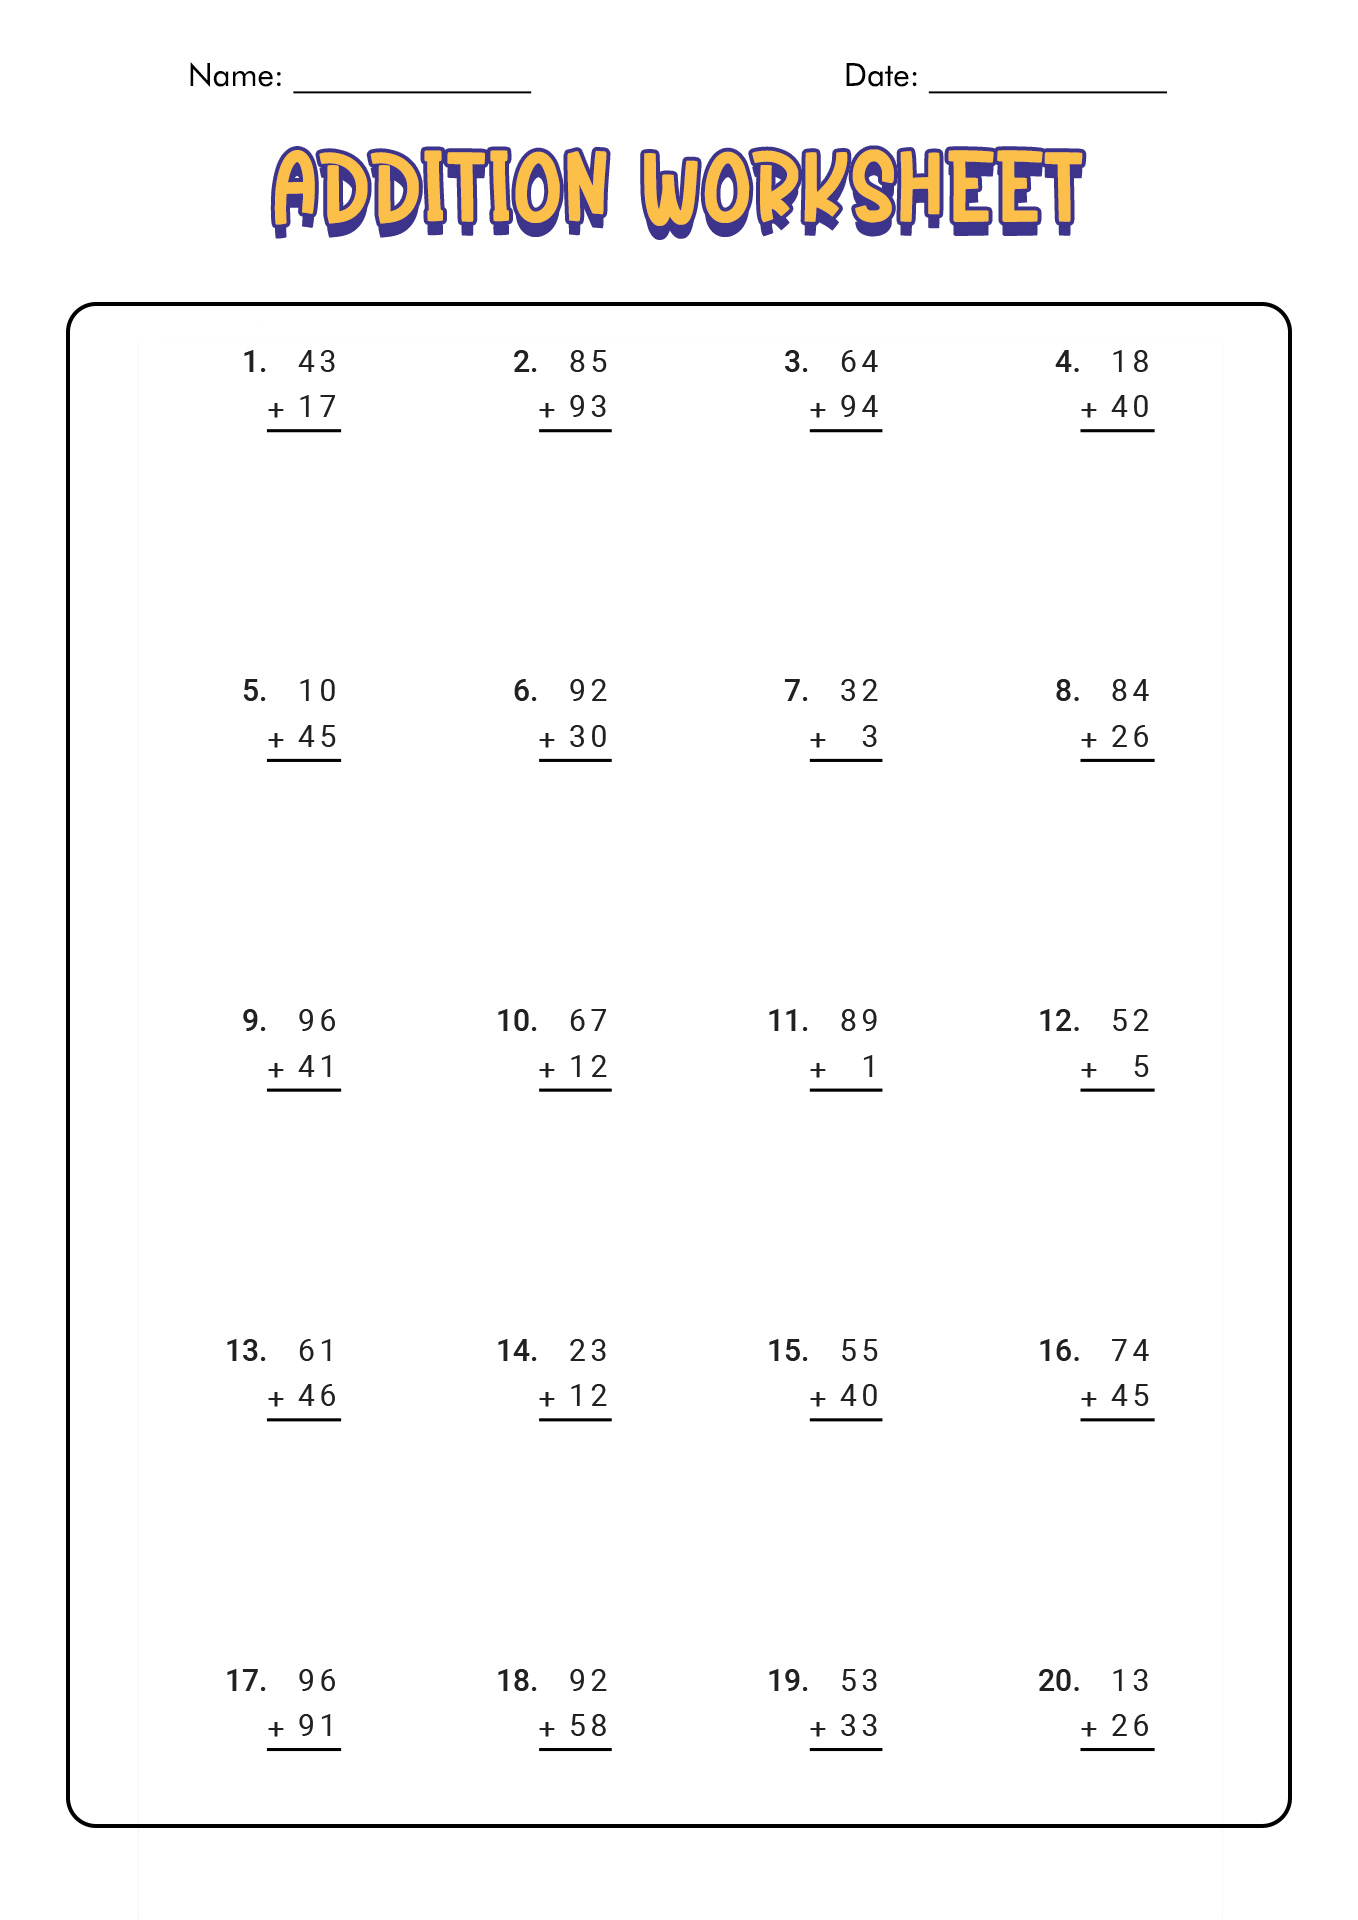 17 First Things First Covey Worksheet - Free PDF at worksheeto.com